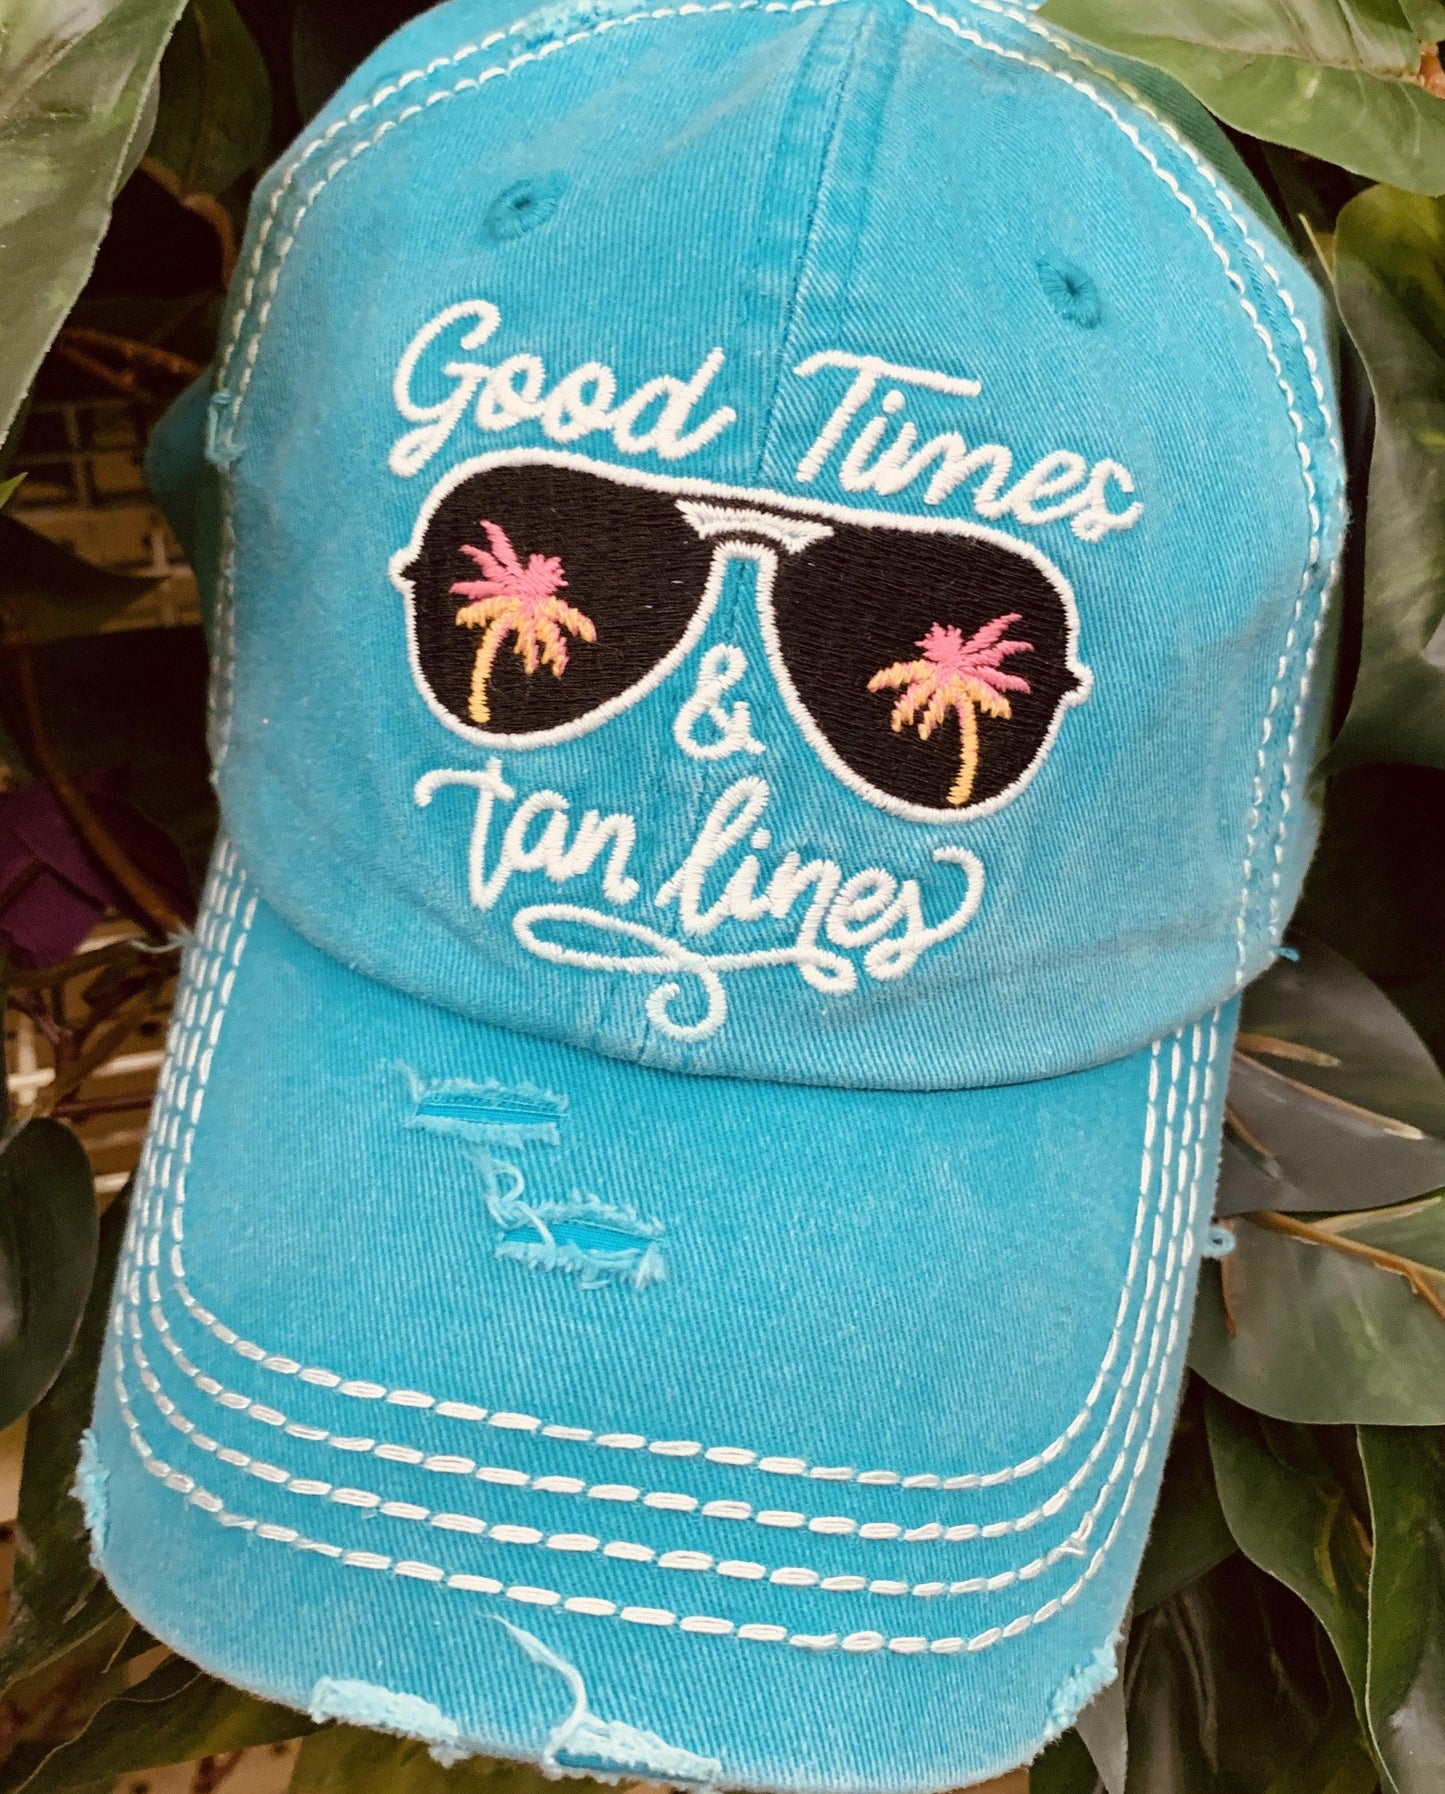 Good times and tan lines • Summer women’s trucker hat • Embroidered teal cap with sunglasses & palm trees - Stacy's Pink Martini Boutique